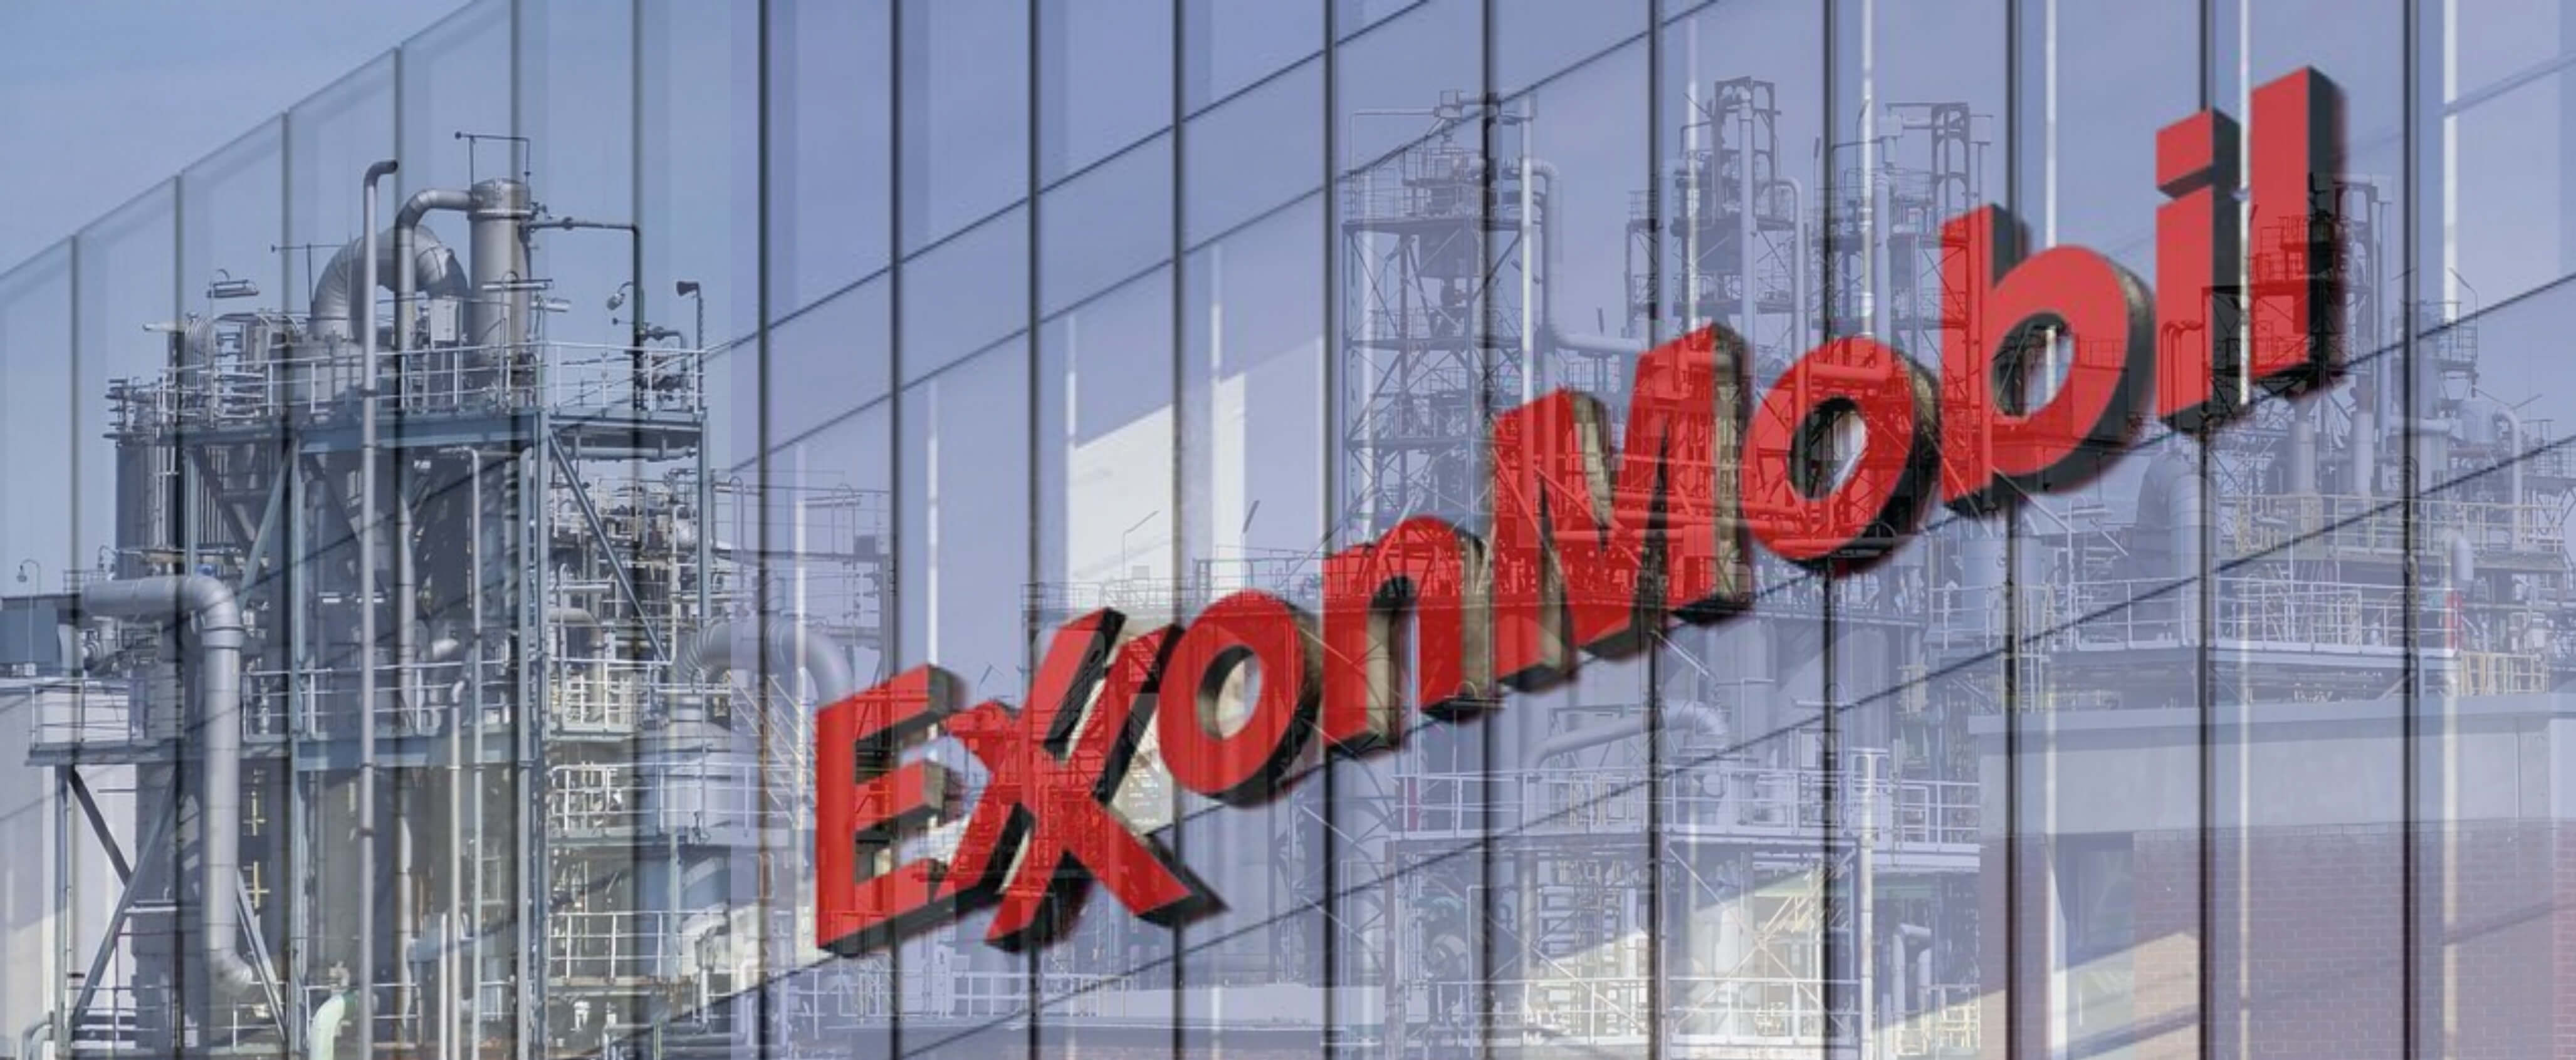 Exxon Mobil Investment Analysis - A Strong Buy